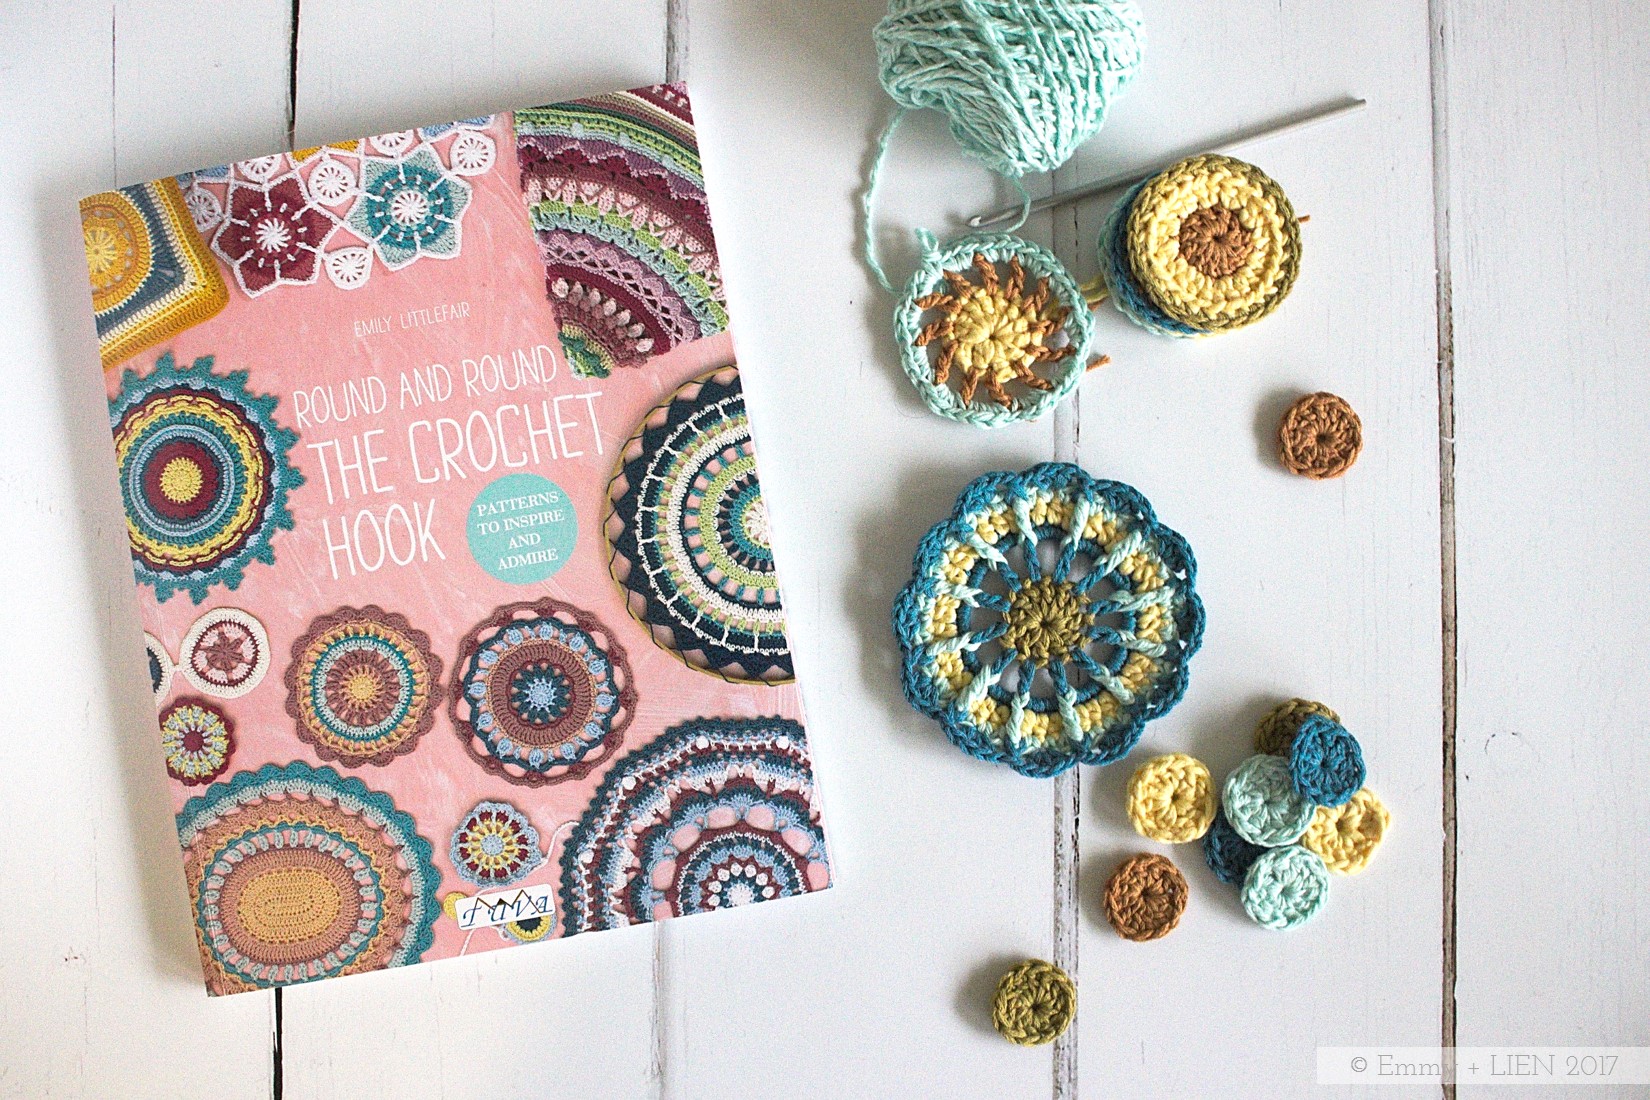 Book review: Design your own crochet projects